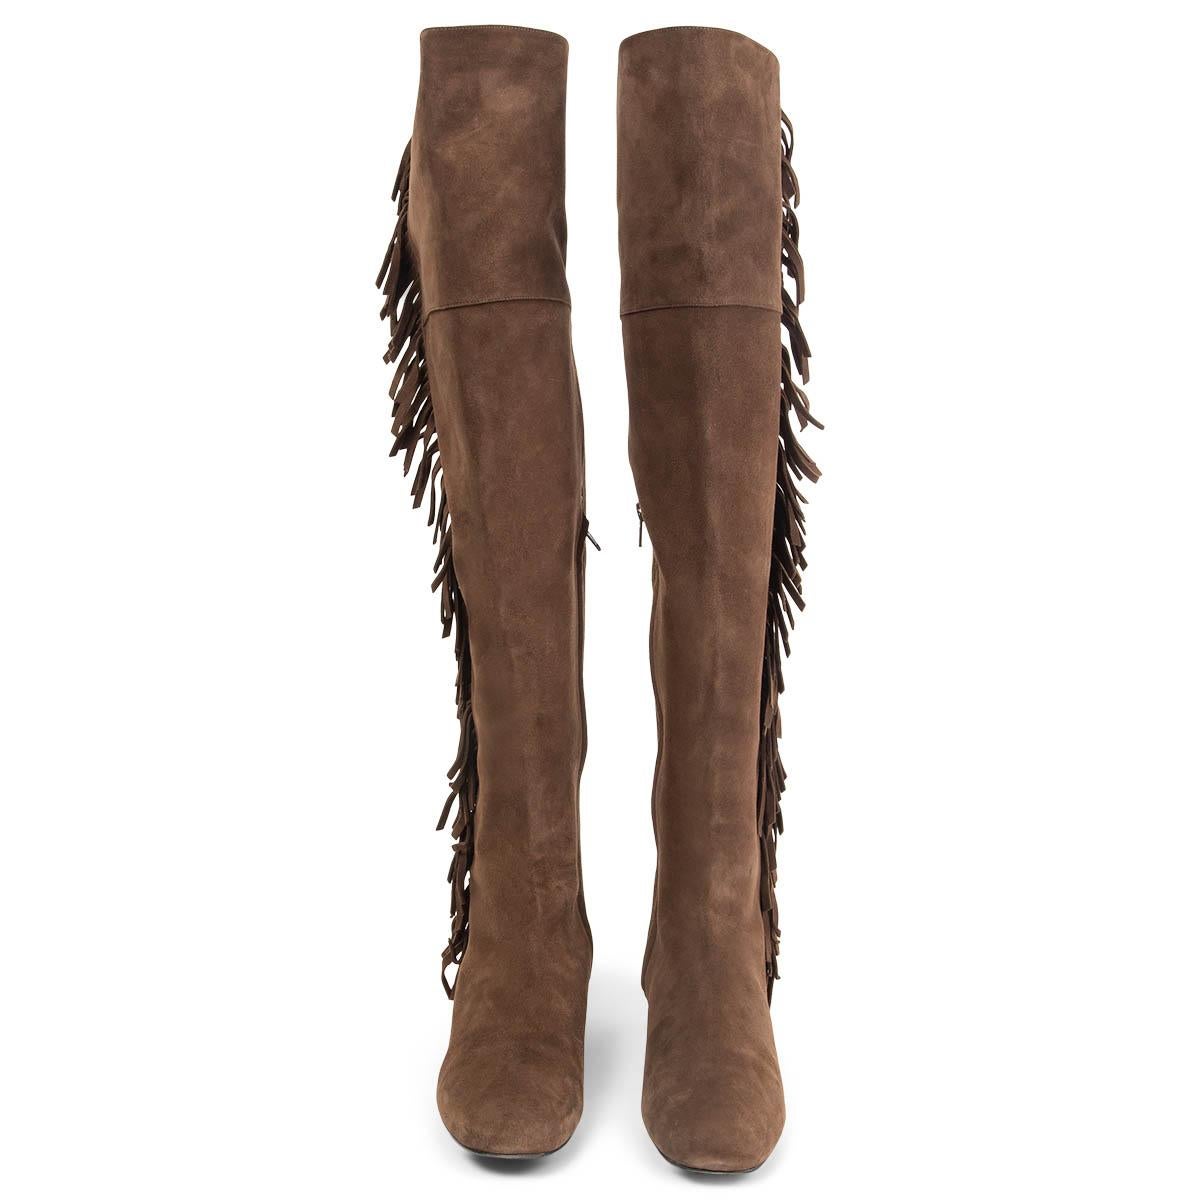 100% authentic Saint Laurent BB 20 Fringed Over The Knee Boots in brown suede with a round toe. Open with a zipper on the inside and have a elastic band at top circumference. Has been worn and are in excellent condition. Come with dust bag.